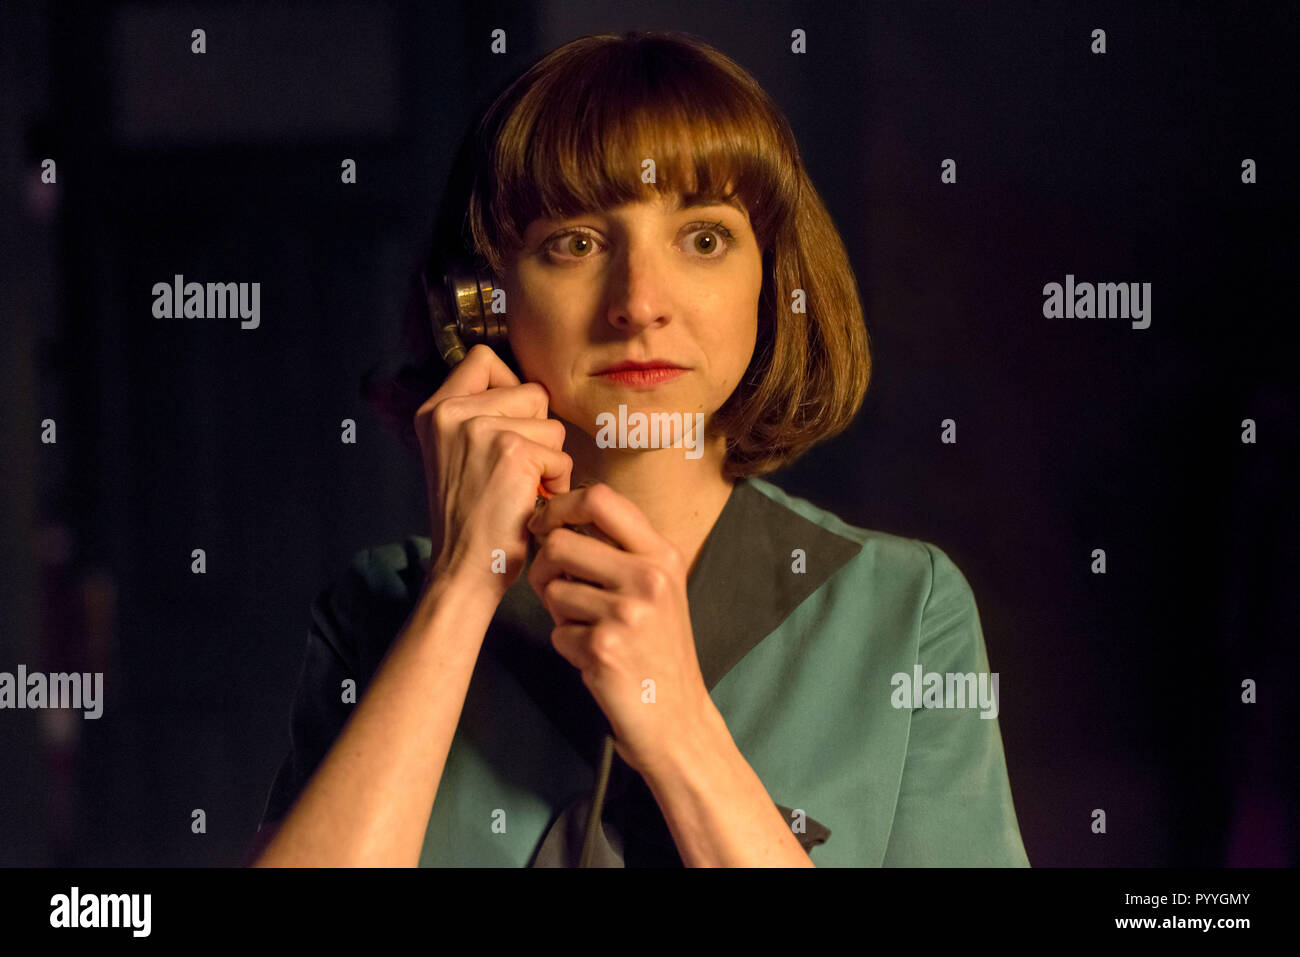 CABLE GIRLS, (aka LAS CHICAS DEL CABLE), Anne Moliner, (Season 3, Episode  306, aired September 7, 2018), ph: Manuel Fernandez / ©Netflix / courtesy  Everett Collection Stock Photo - Alamy